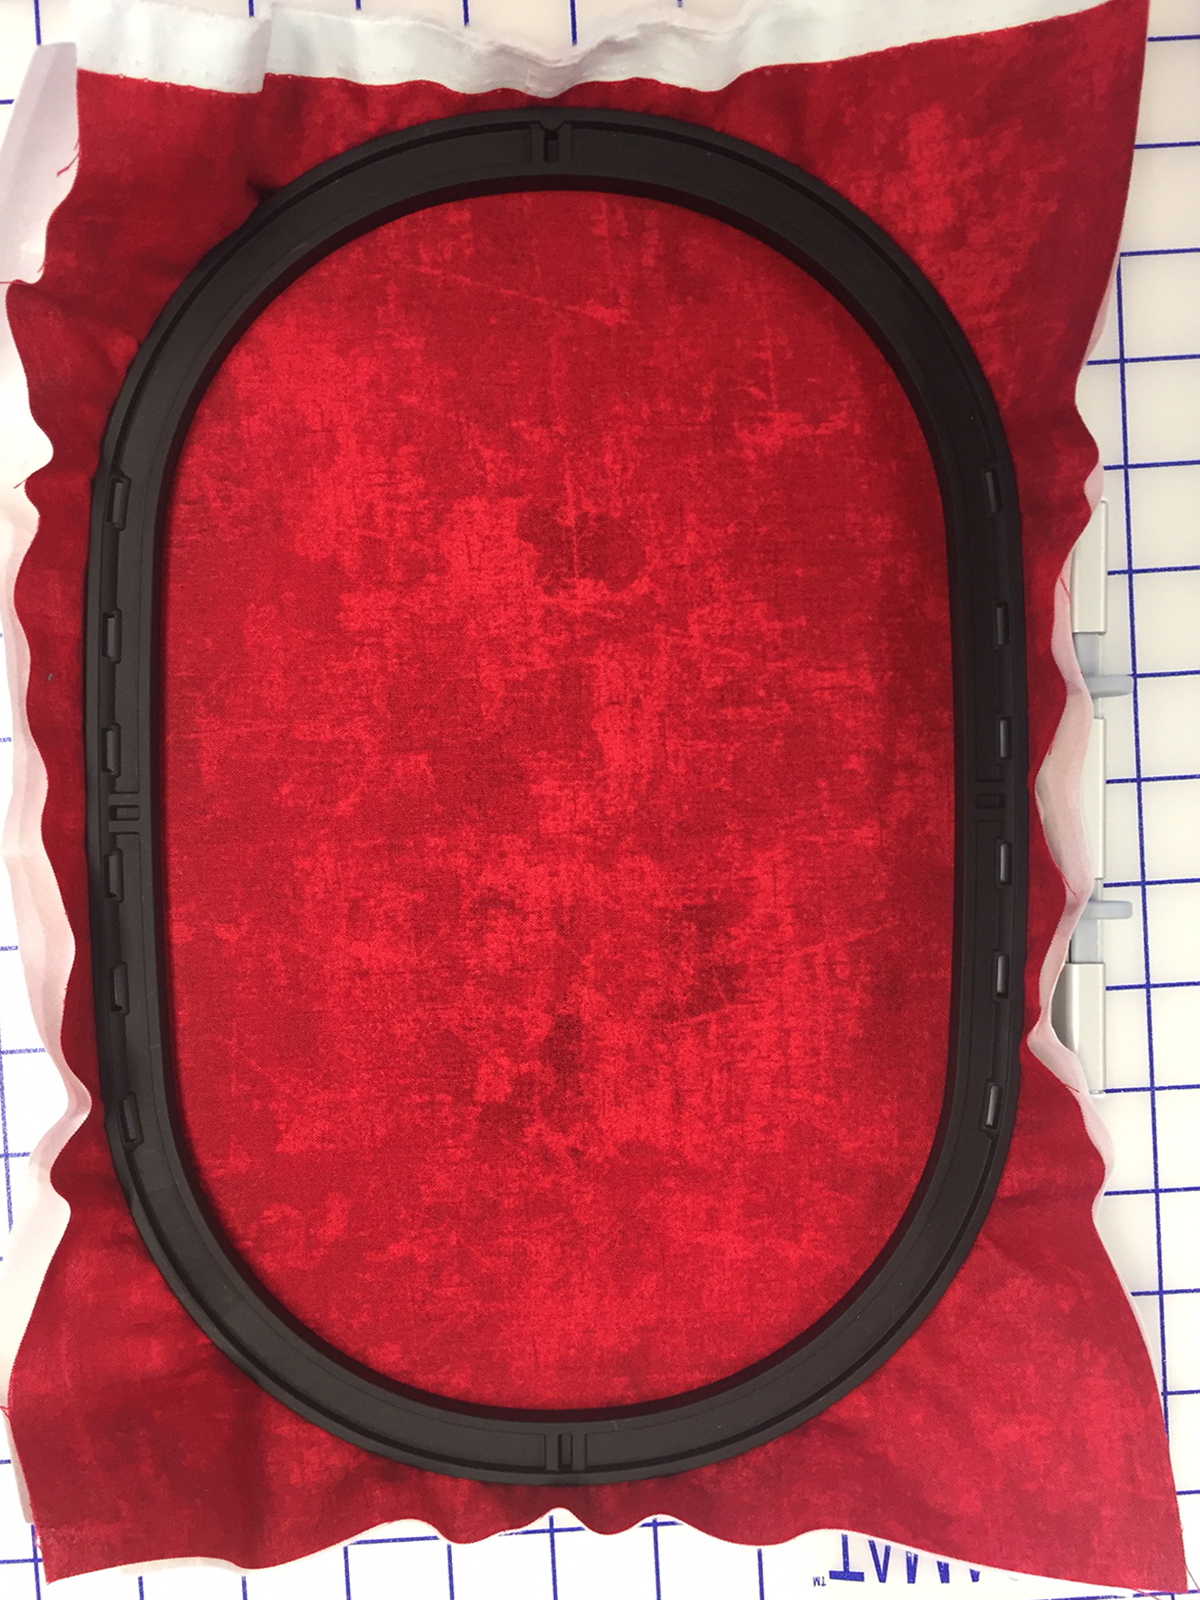 redwork_embroidery_hoop_fabric_embroidery